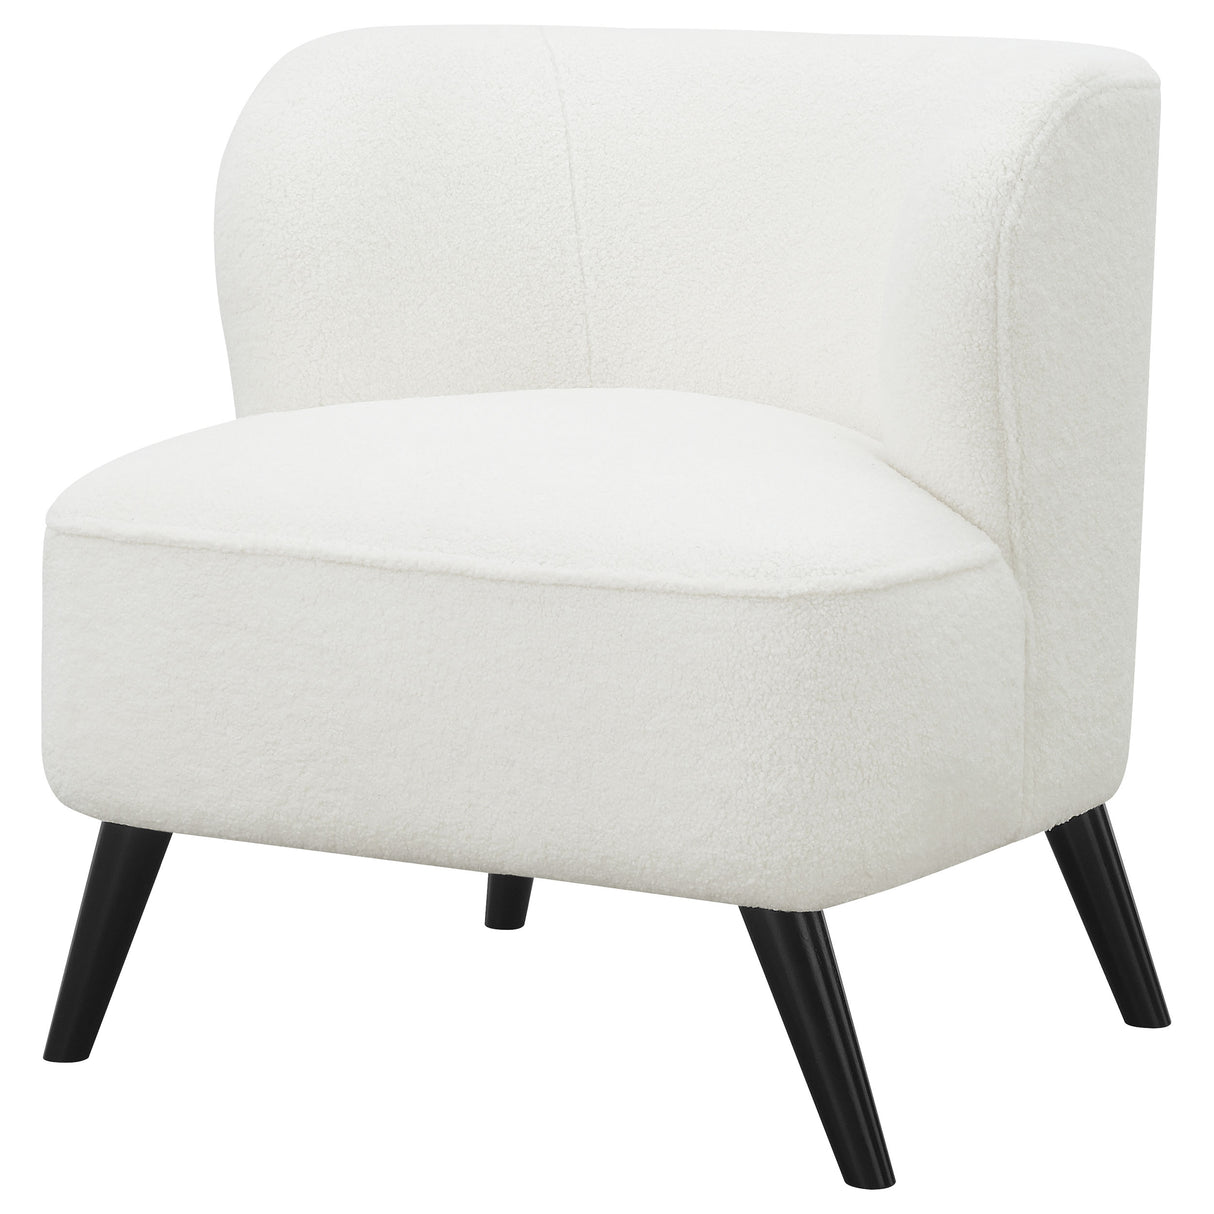 Accent Chair - Alonzo Upholstered Track Arms Accent Chair Natural